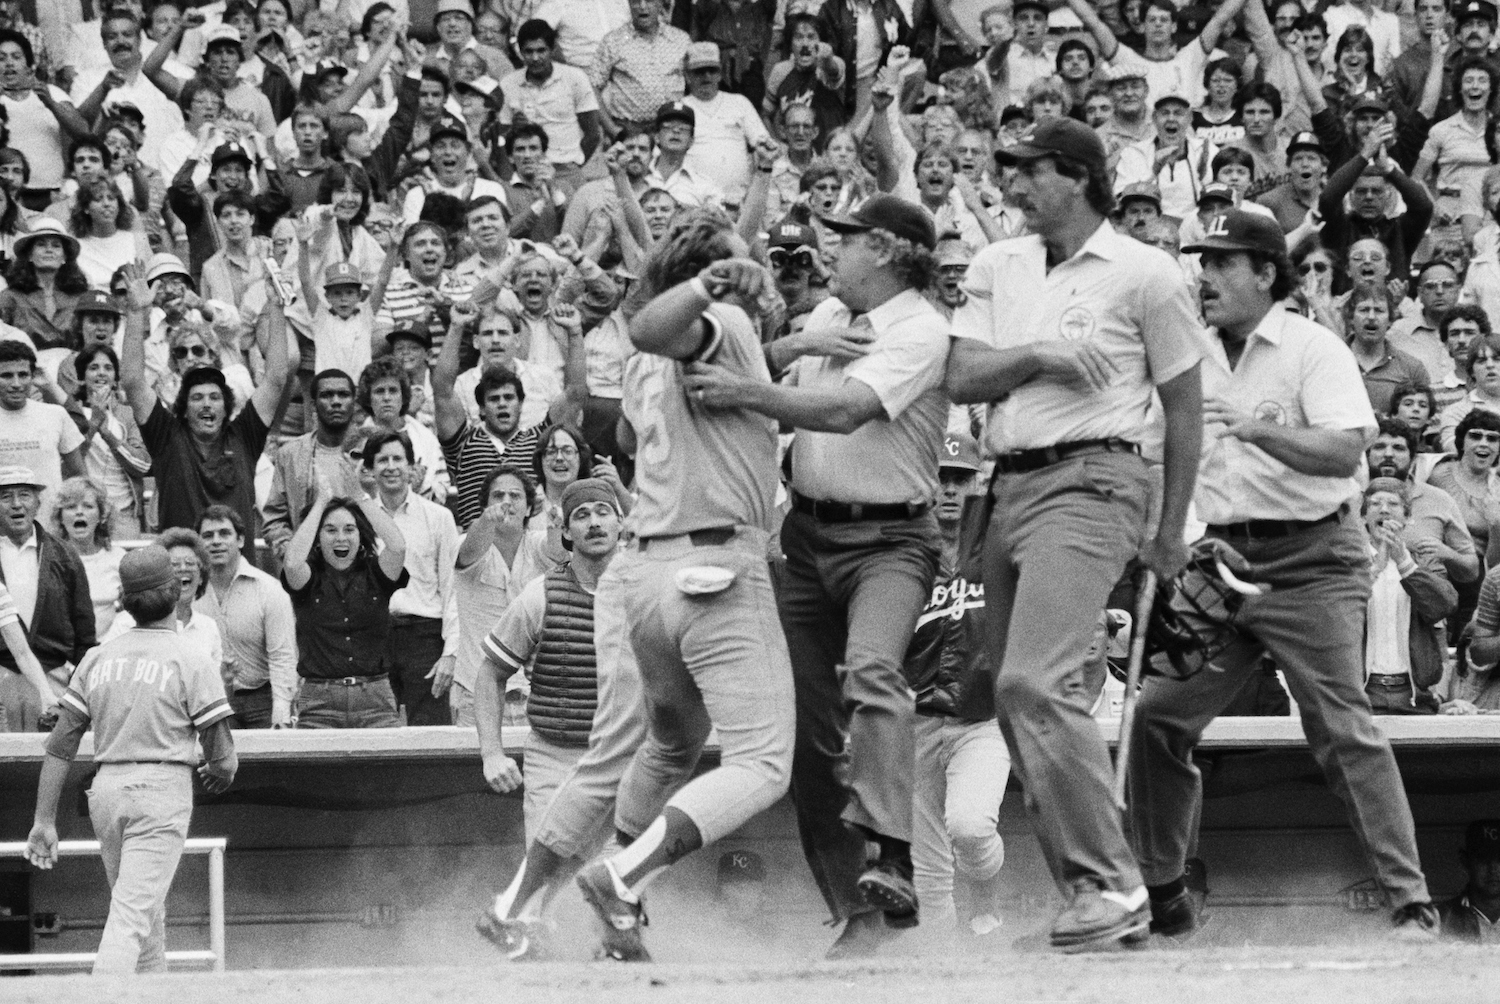 MLB Flashback: George Brett and the Pine Tar Bat Incident Happened on This Day